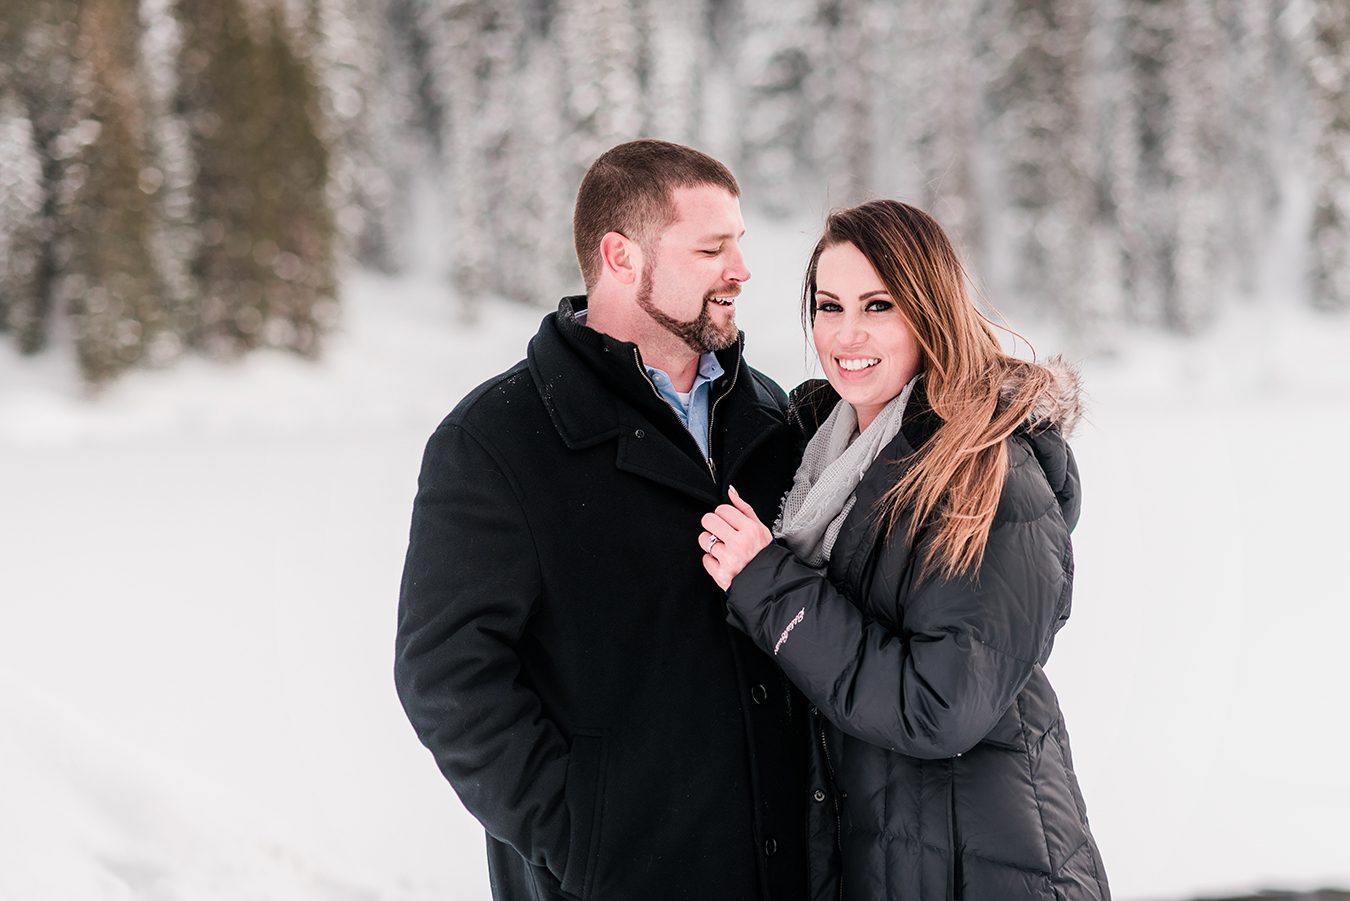 As we sat a the bar for a quick drink before their snowy engagement on the Grand Mesa, Adam and Monica recounted their proposal story to me.